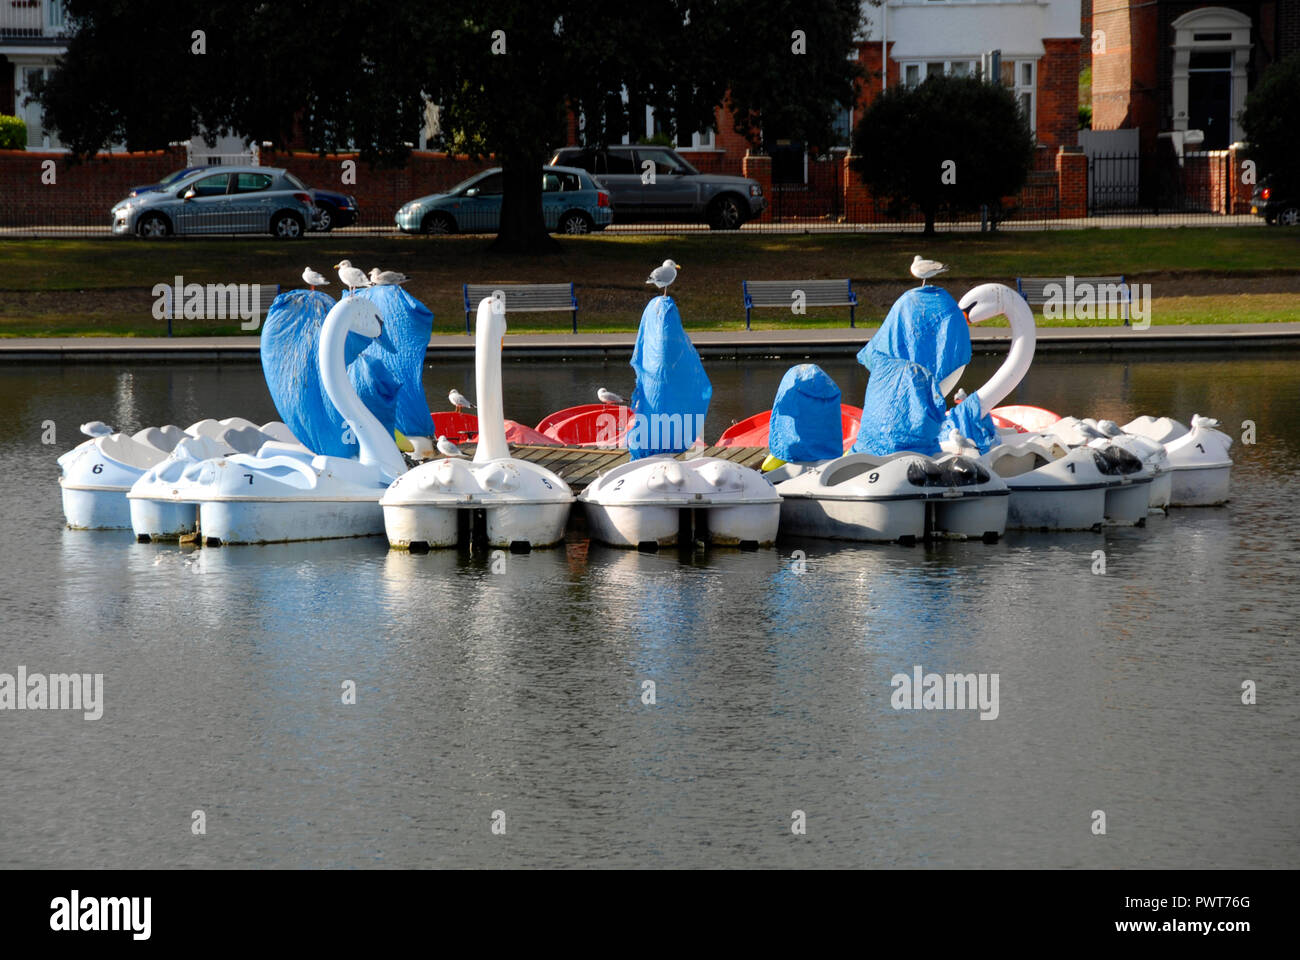 Pedalos in the shape of swans, Canoe Lake, Southsea, Porstmouth, Hampshire, England, partly covered as out of season Stock Photo